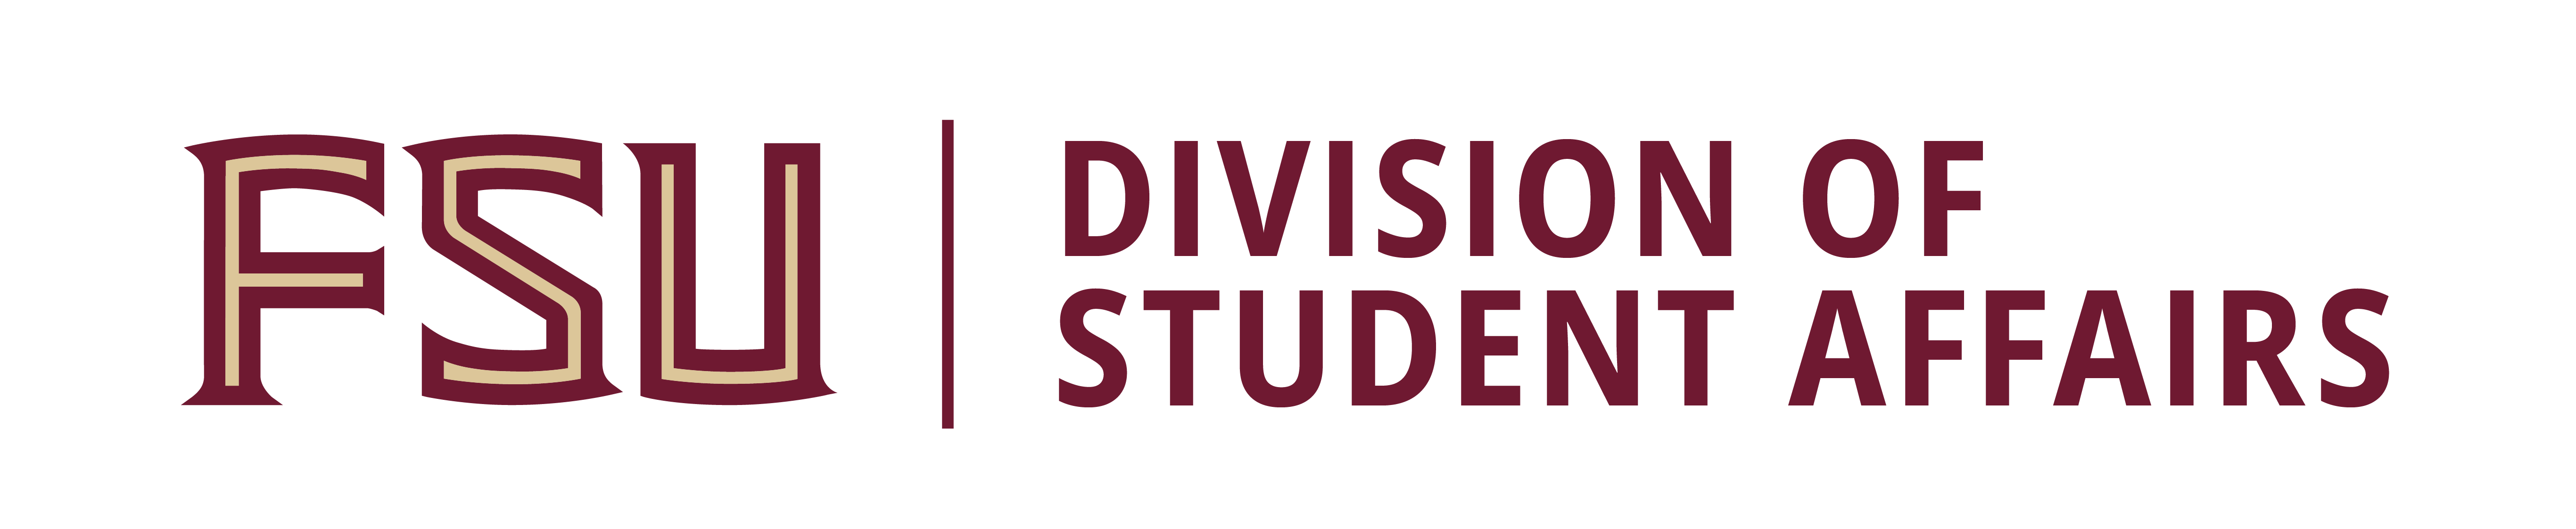 Division of Student Affairs at Florida State University